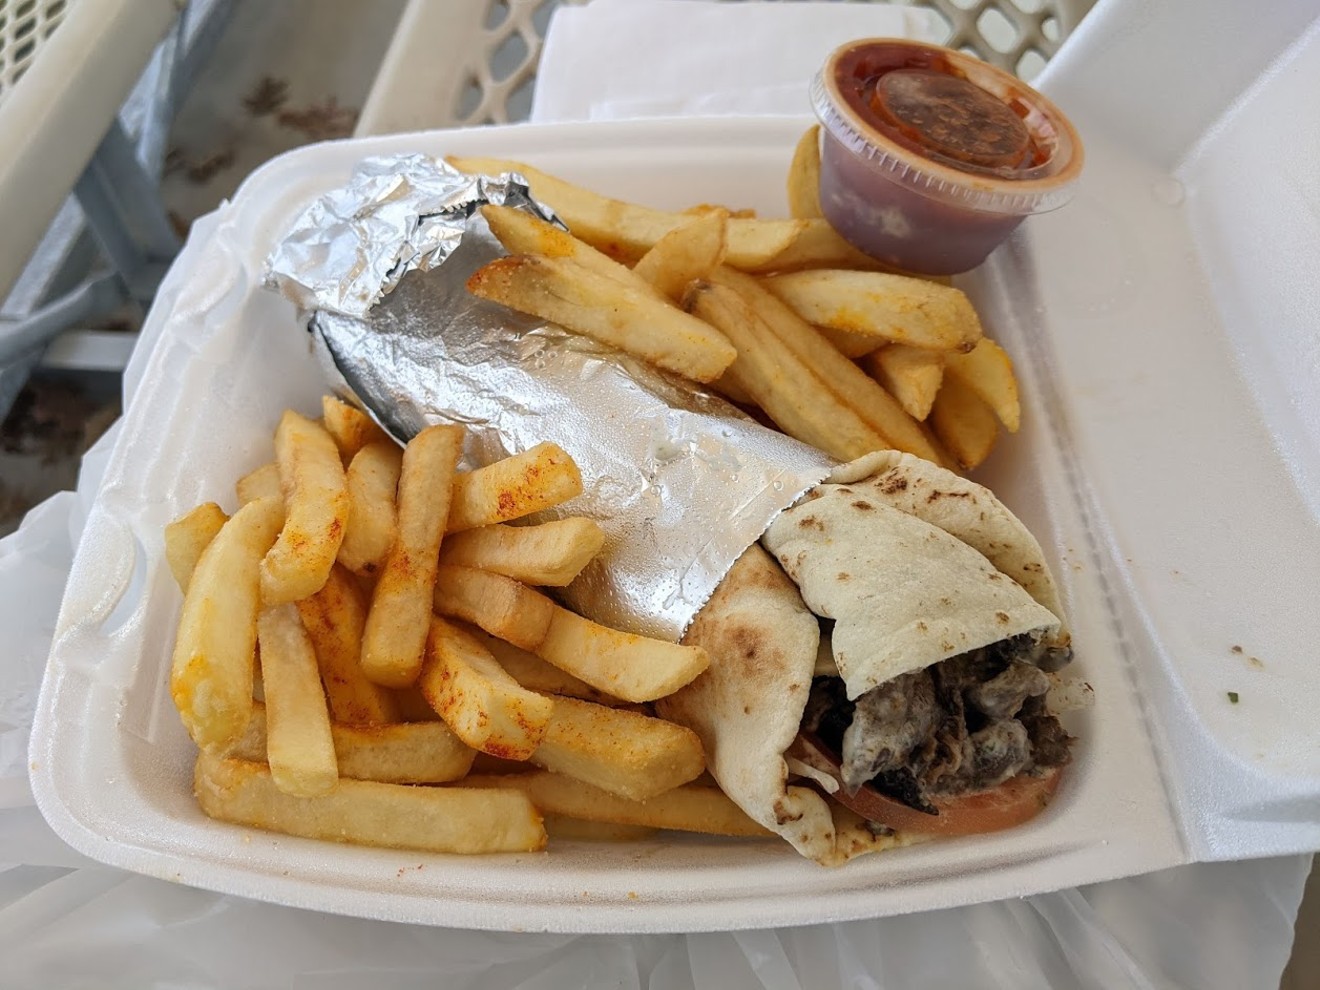 A beef shawarma wrap with fries from Pita Town